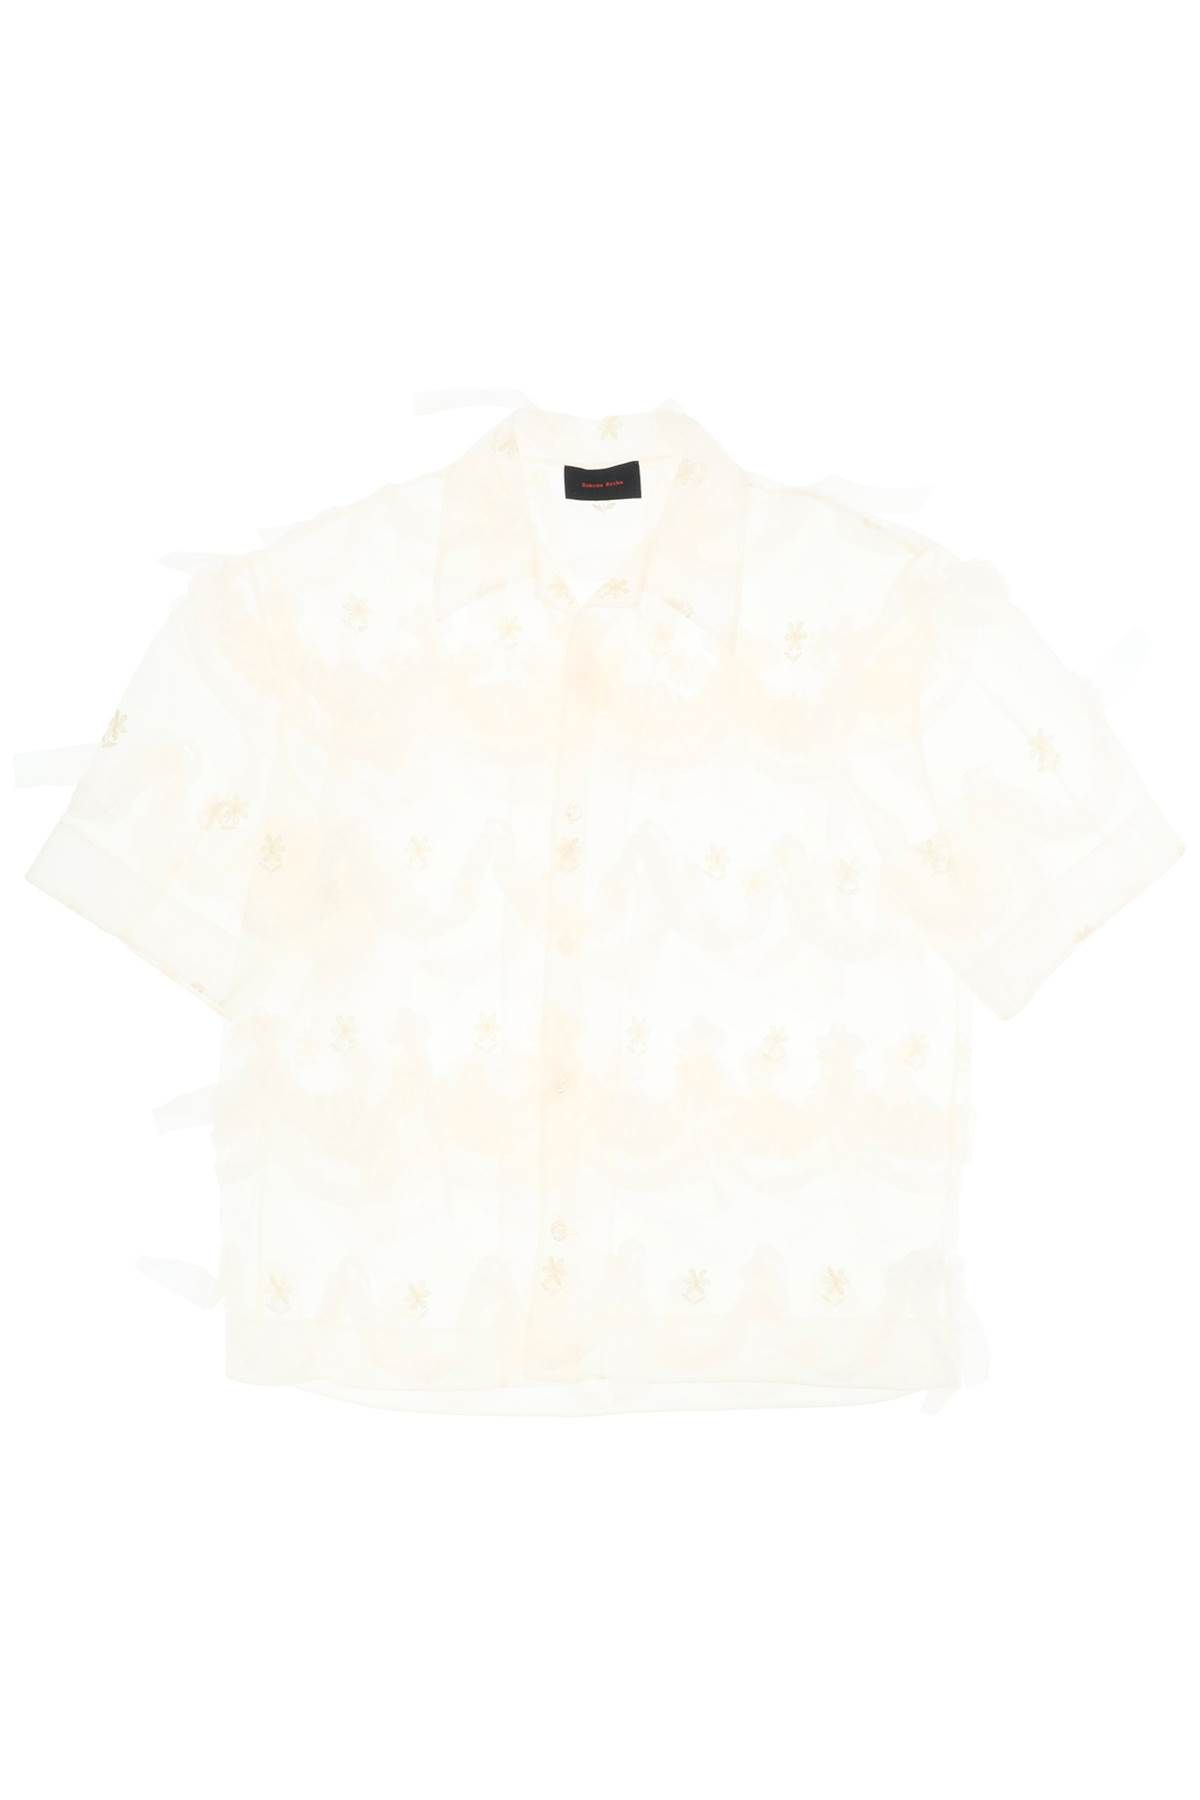 SIMONE ROCHA "TULLE SHIRT WITH EMBROIDERED DETAILS"